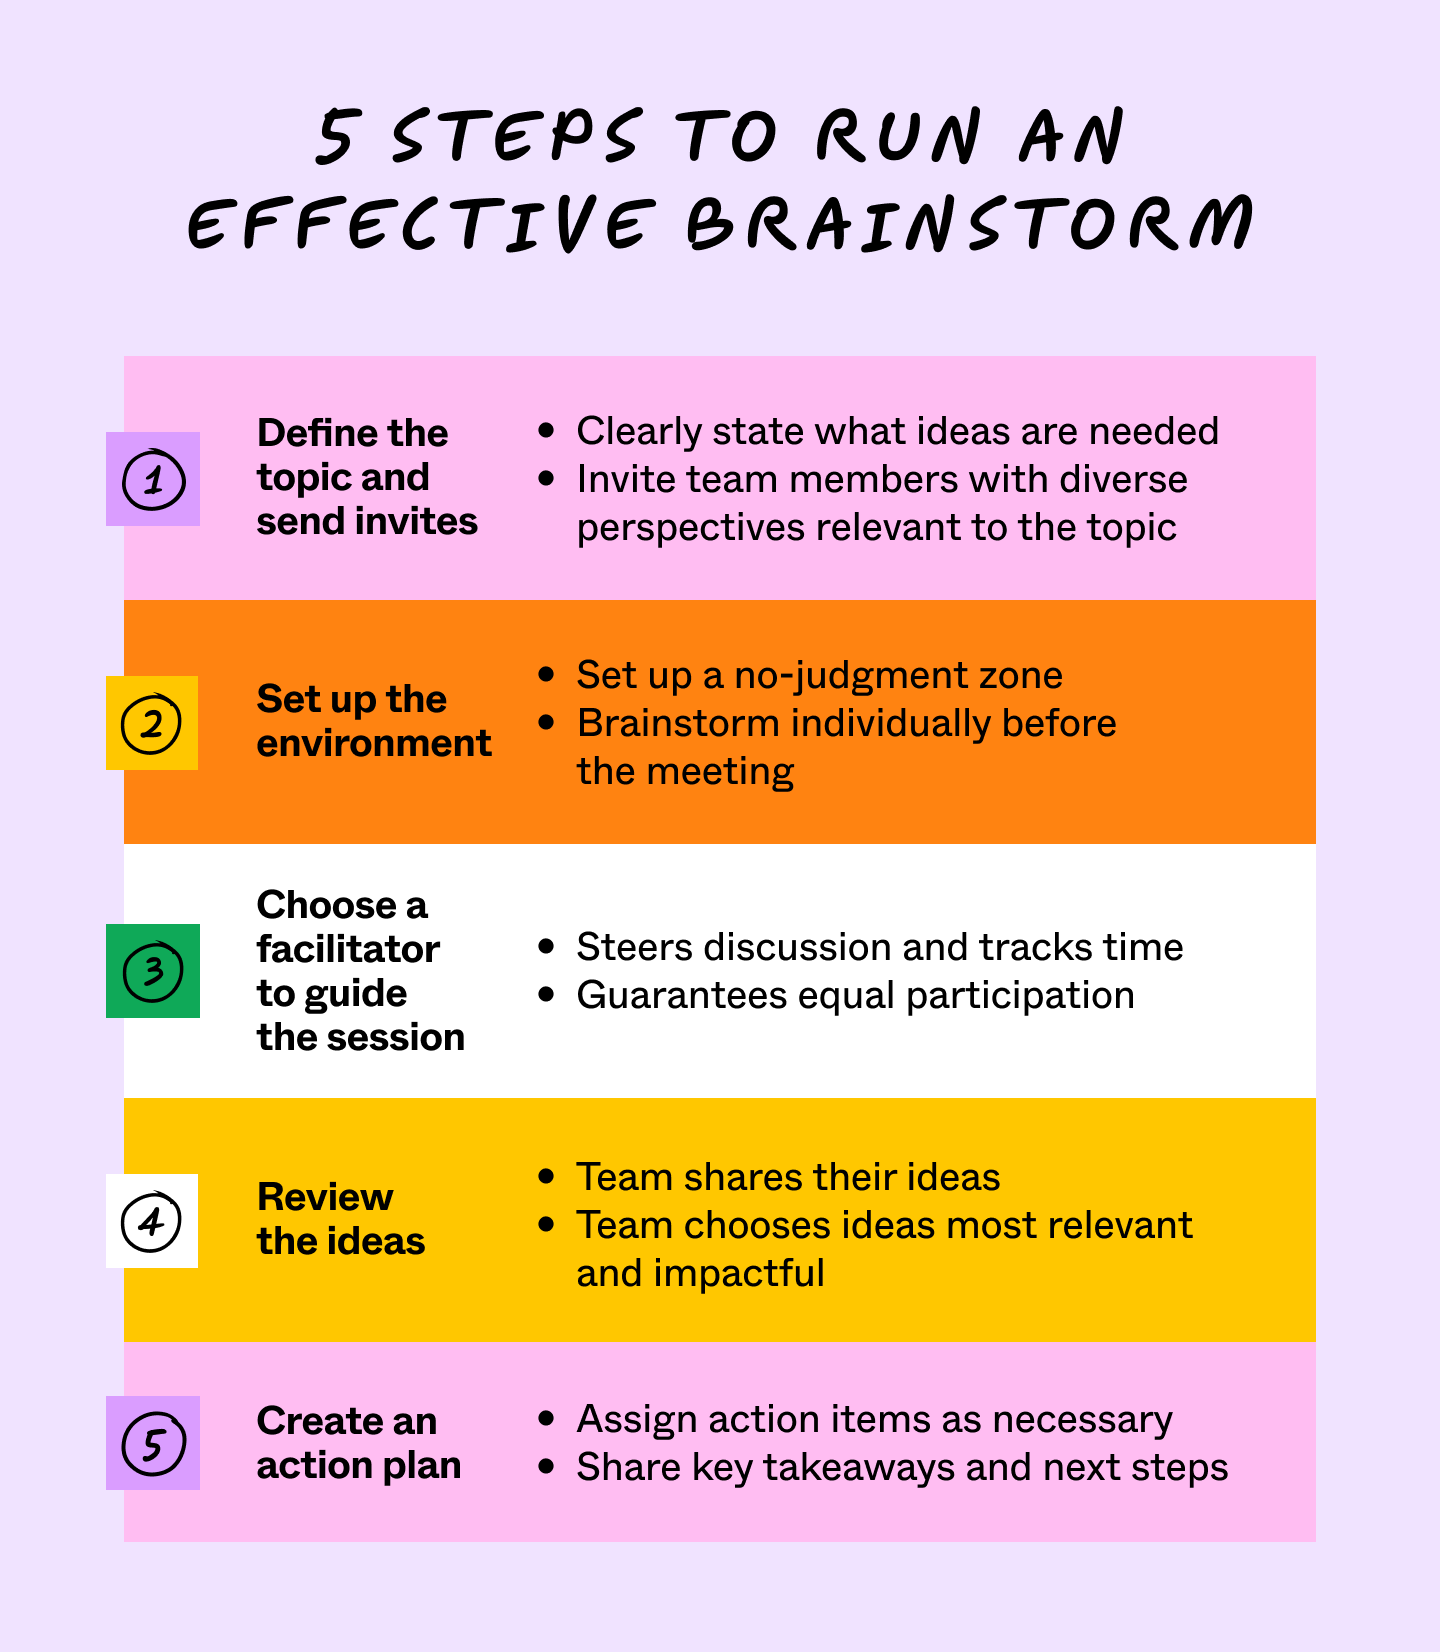 5 steps to an effective brainstorm